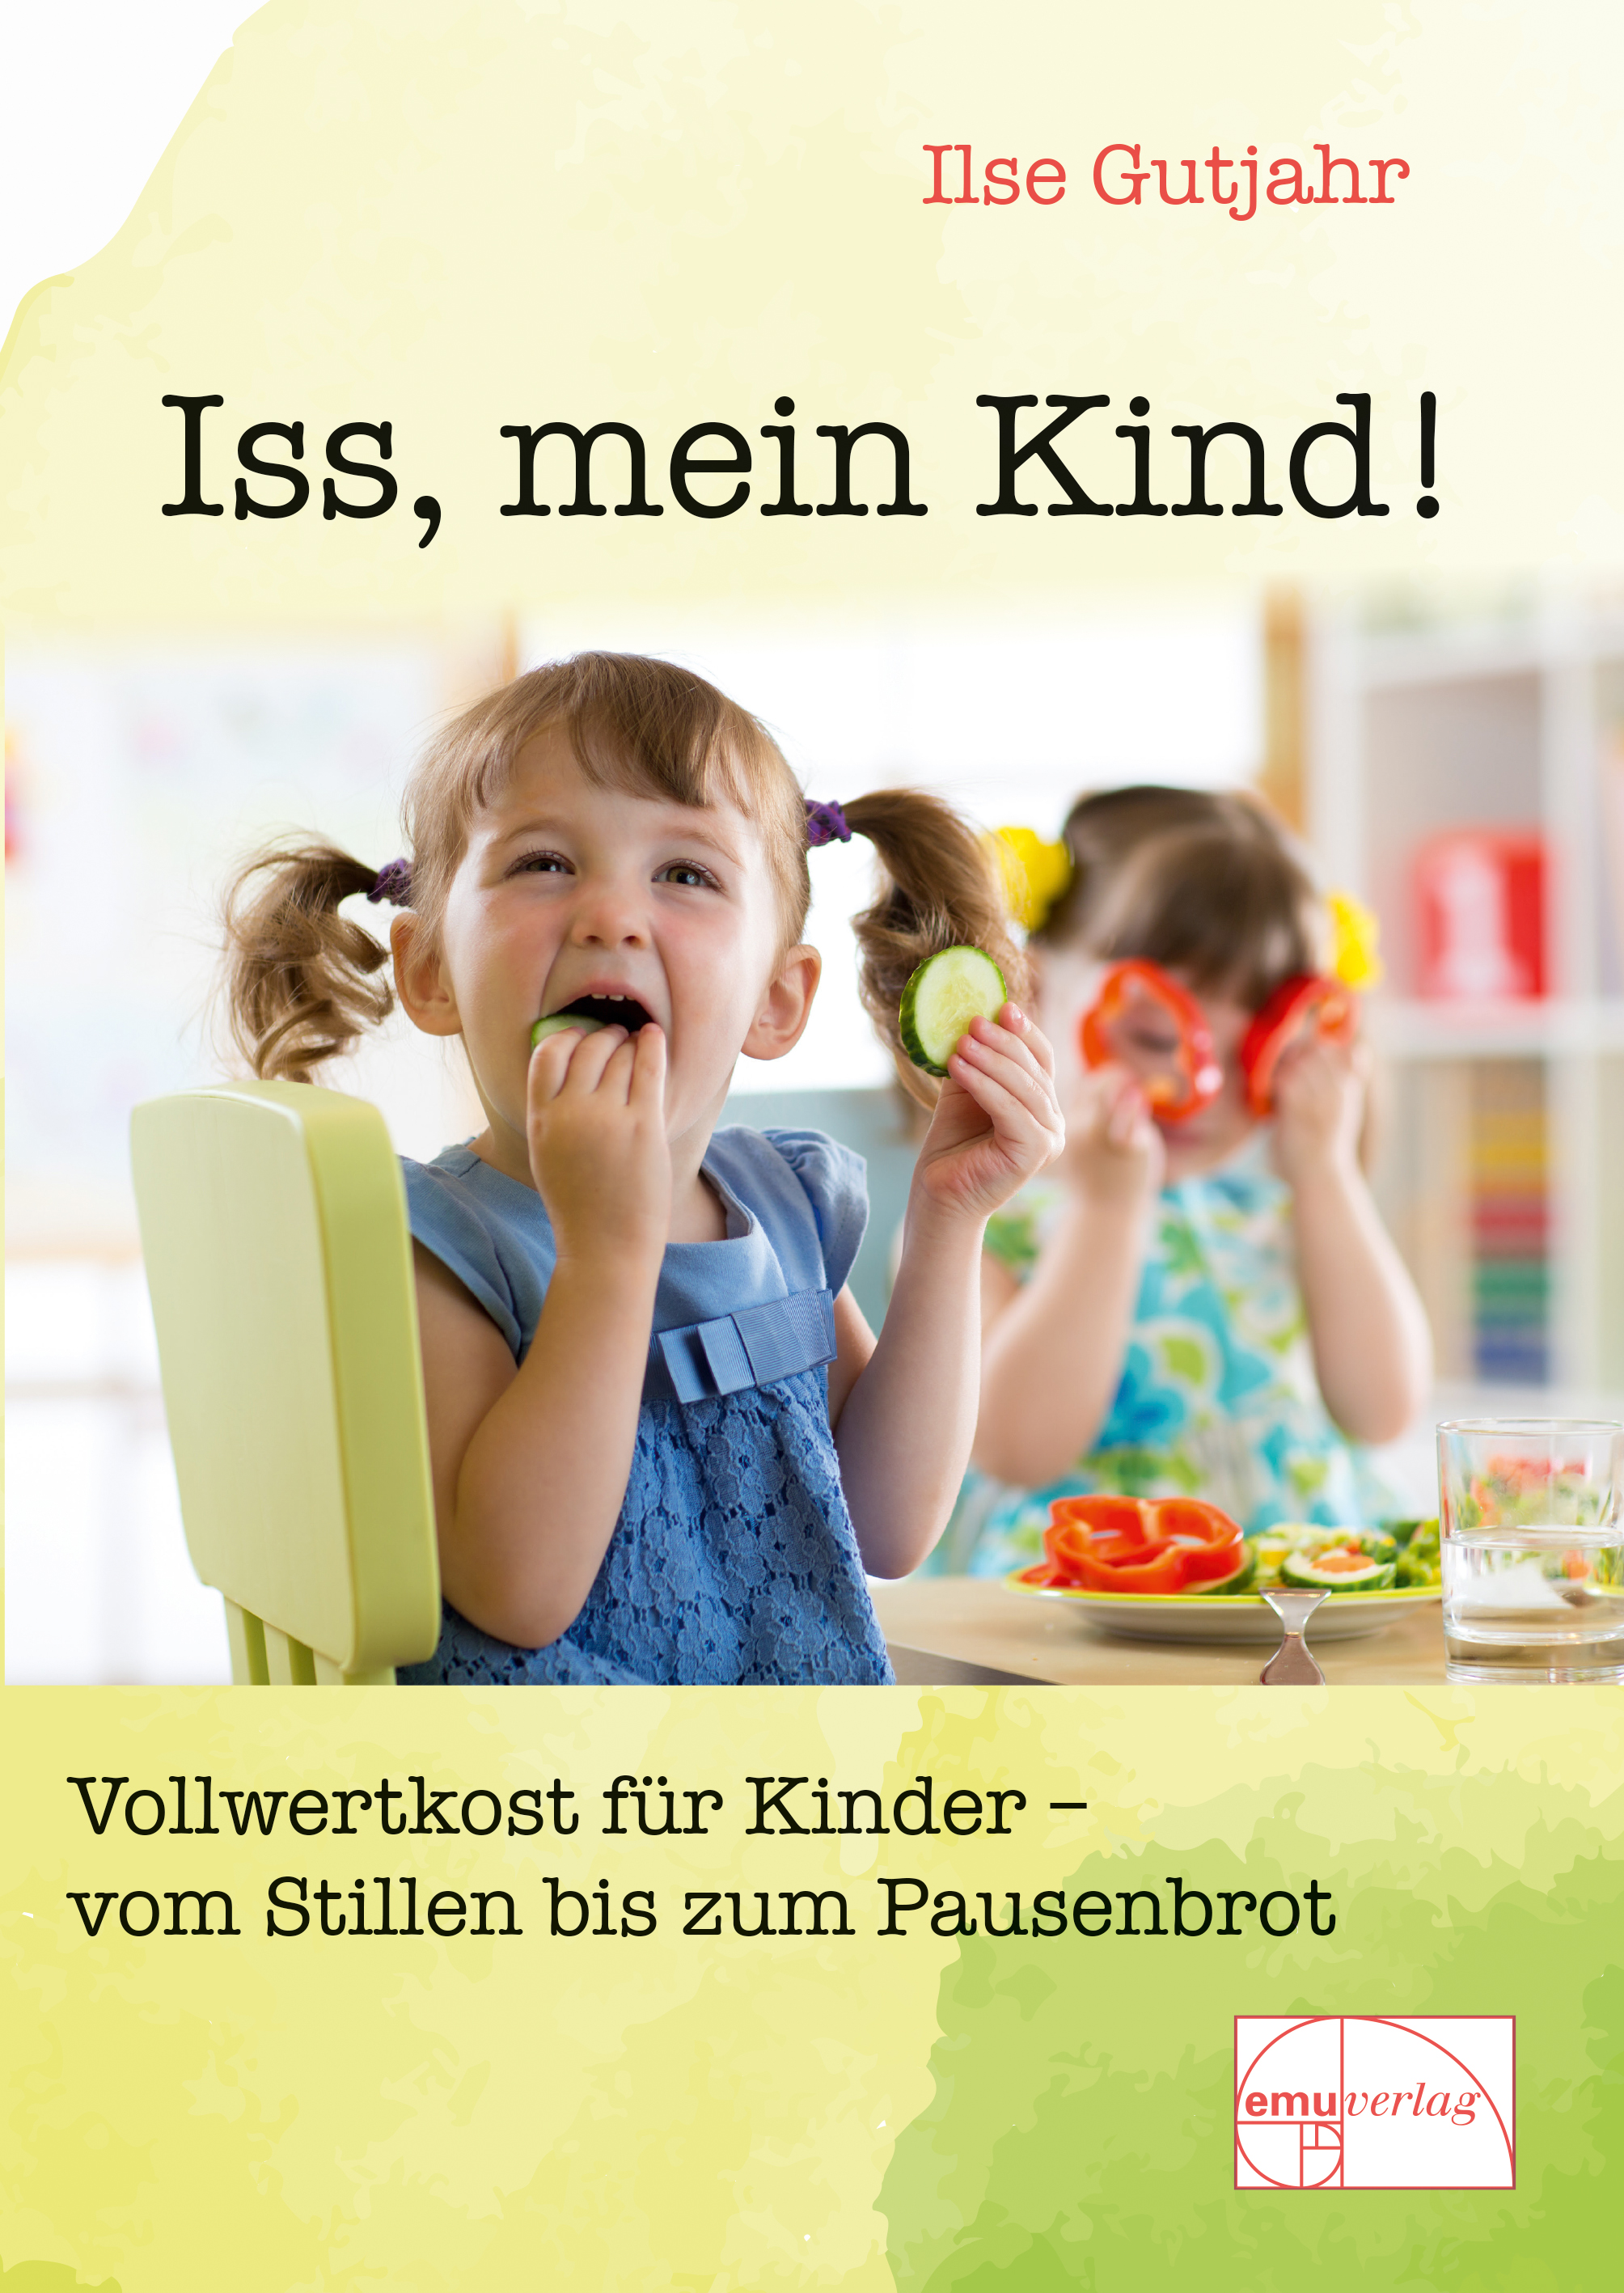 Iss, mein Kind